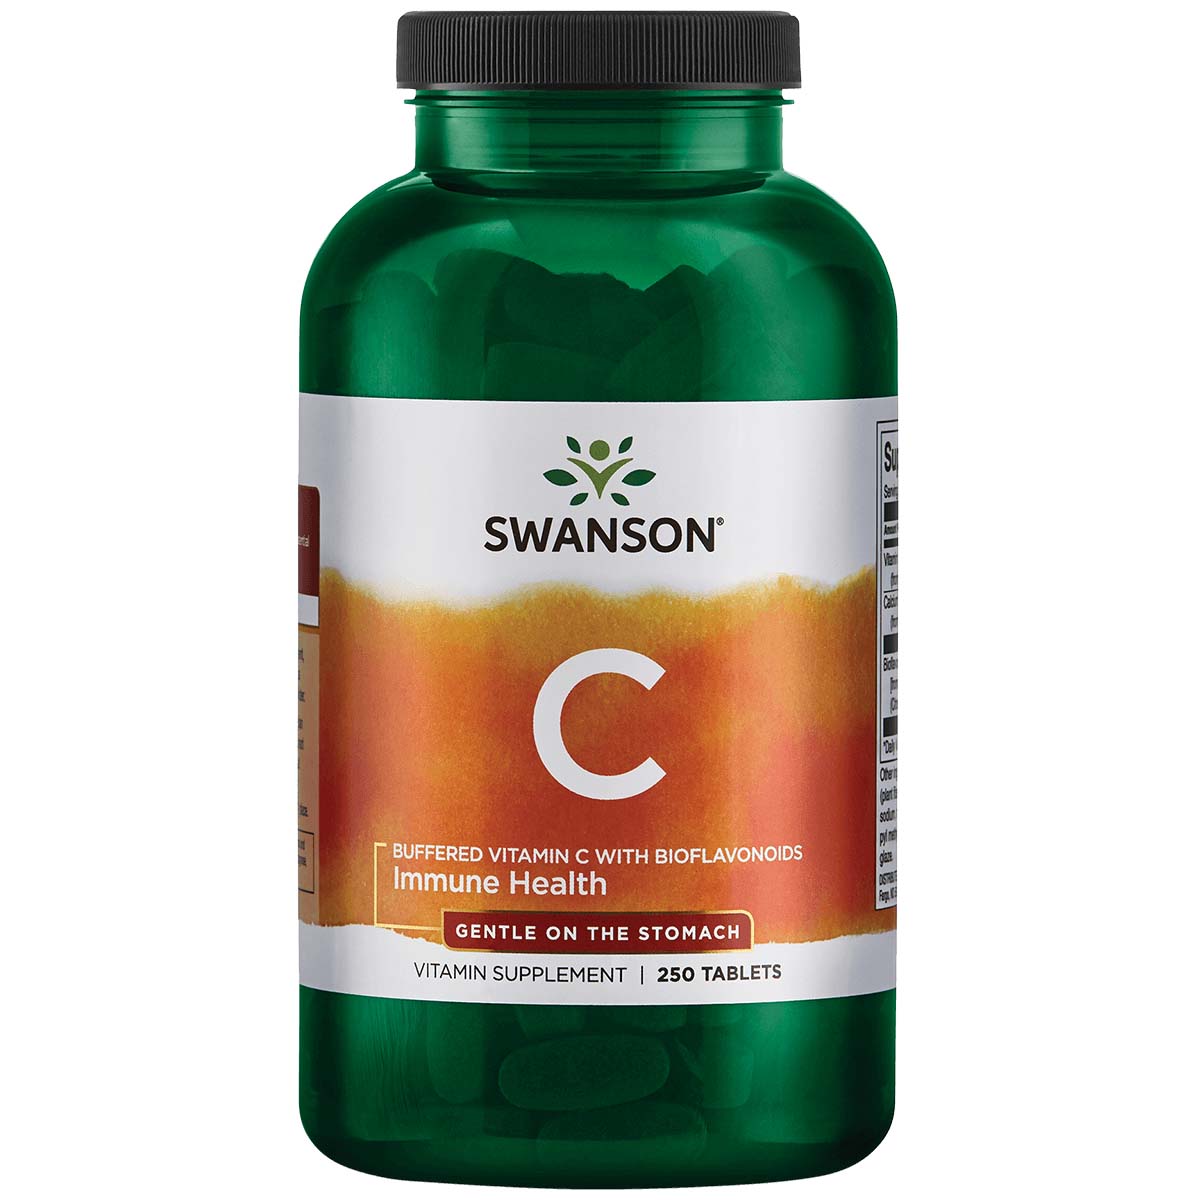 Swanson Buffered Vitamin C with Bioflavonoids, 1000 mg, 250 Tablets